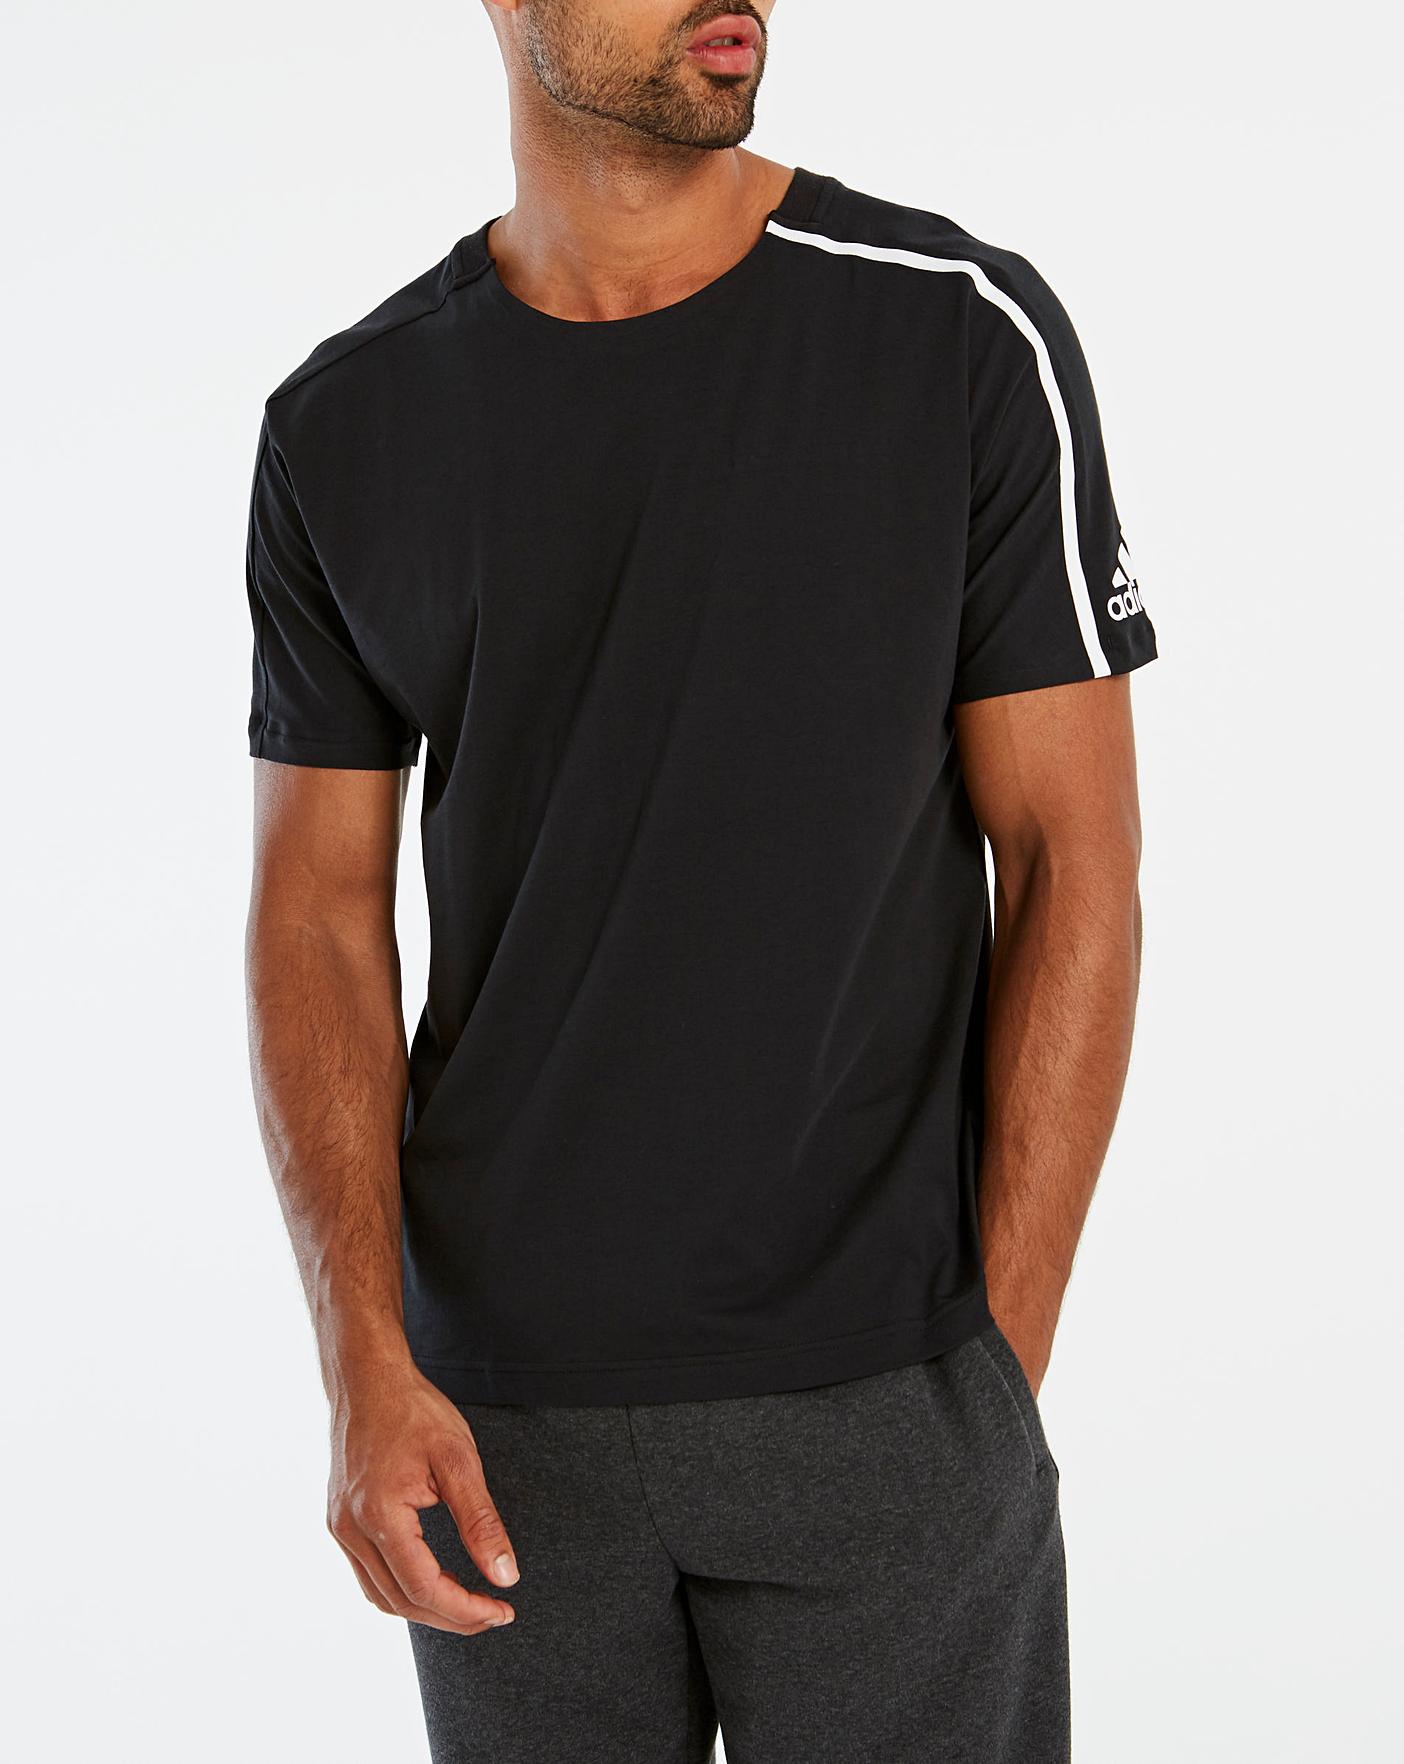 adidas ZNE Tee | Oxendales